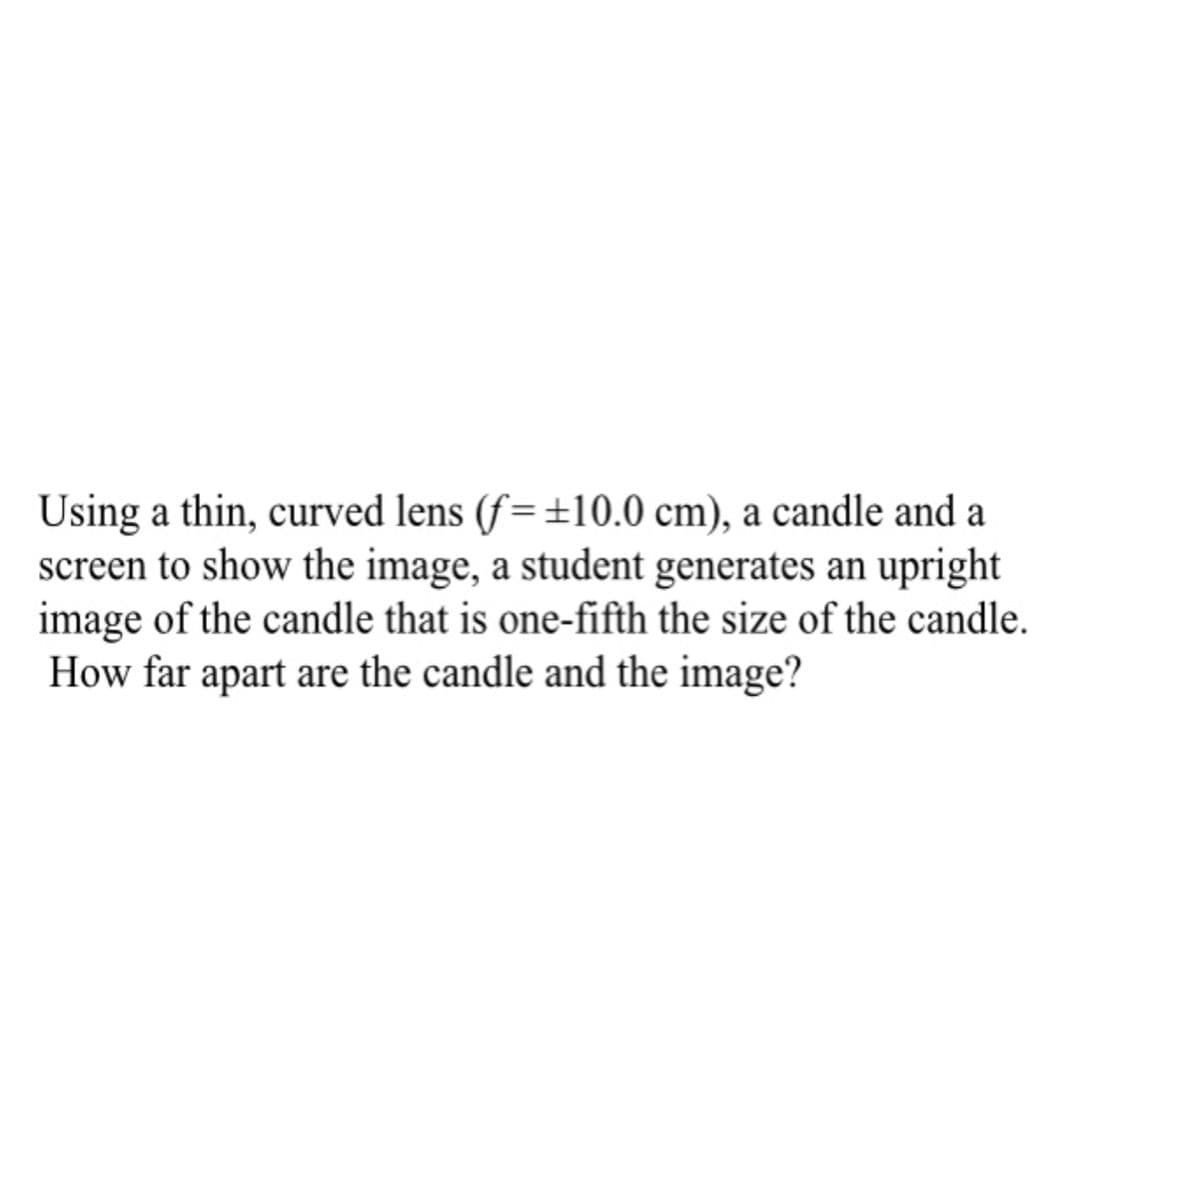 Using a thin, curved lens (f=±10.0 cm), a candle and a
screen to show the image, a student generates an upright
image of the candle that is one-fifth the size of the candle.
How far apart are the candle and the image?
